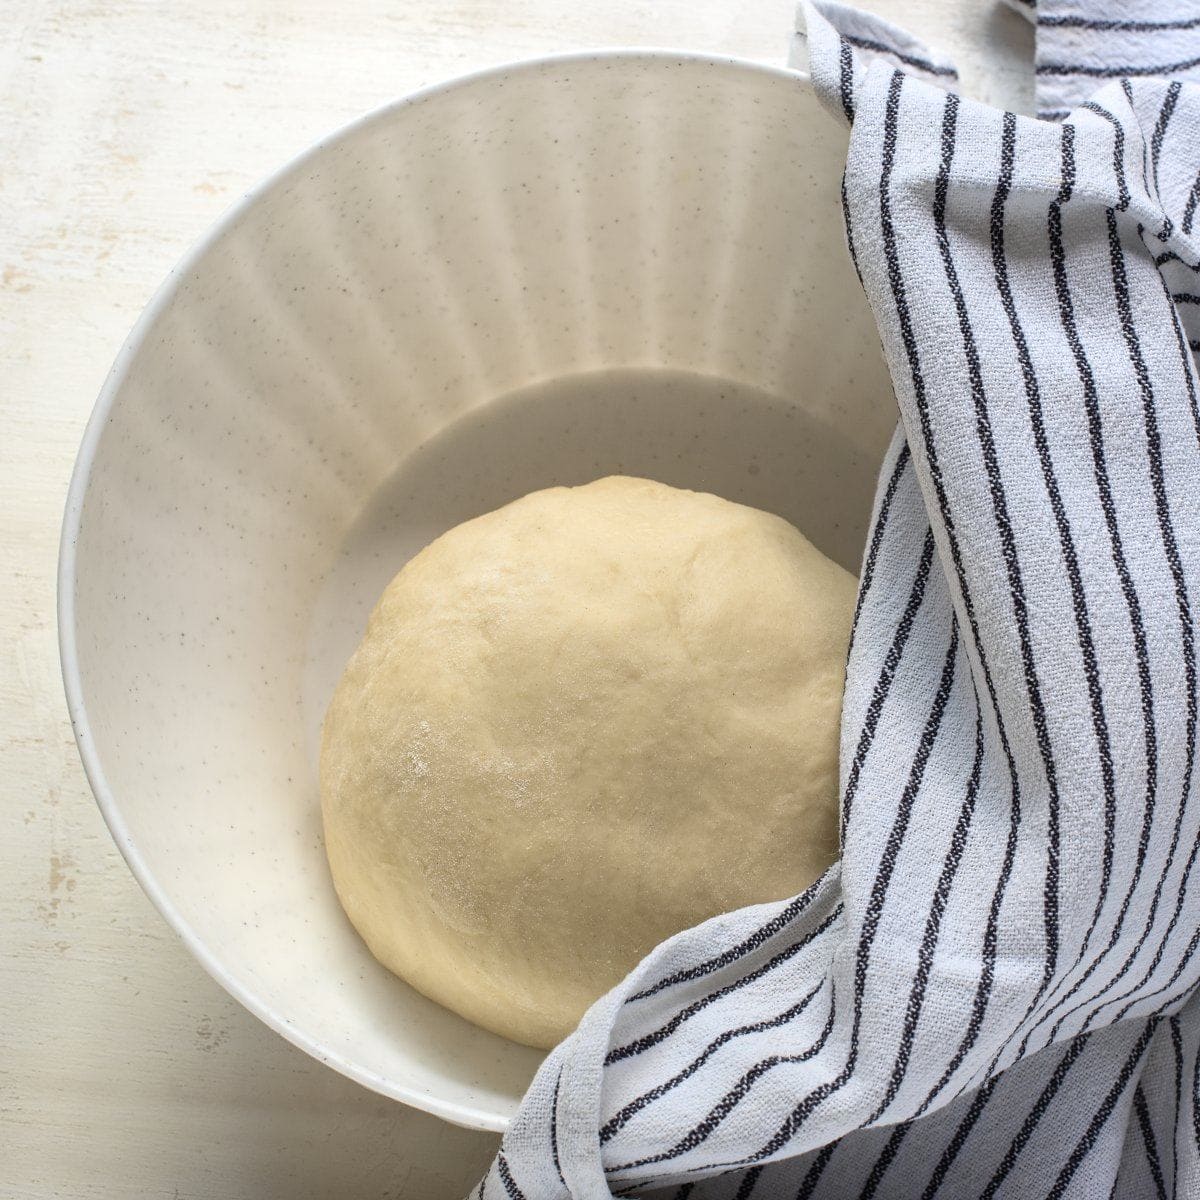 Ball of yeast dough before rising. In a white bowl, partly covered with stripped kitchen towel.